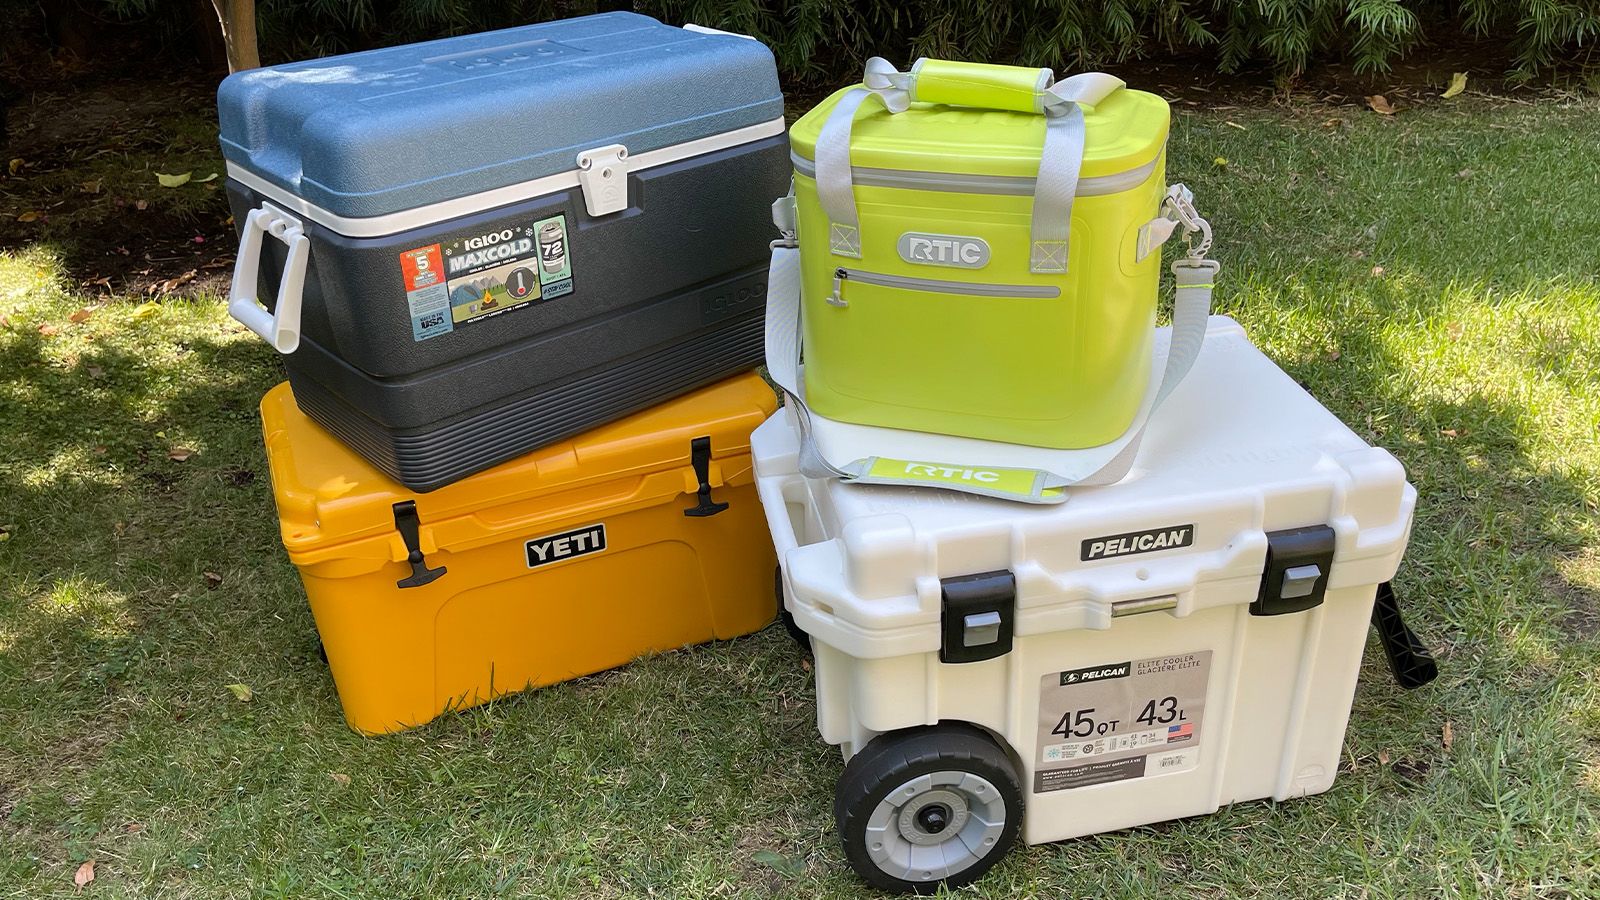 7 Best Coolers 2023 Tested by Food Network Kitchen